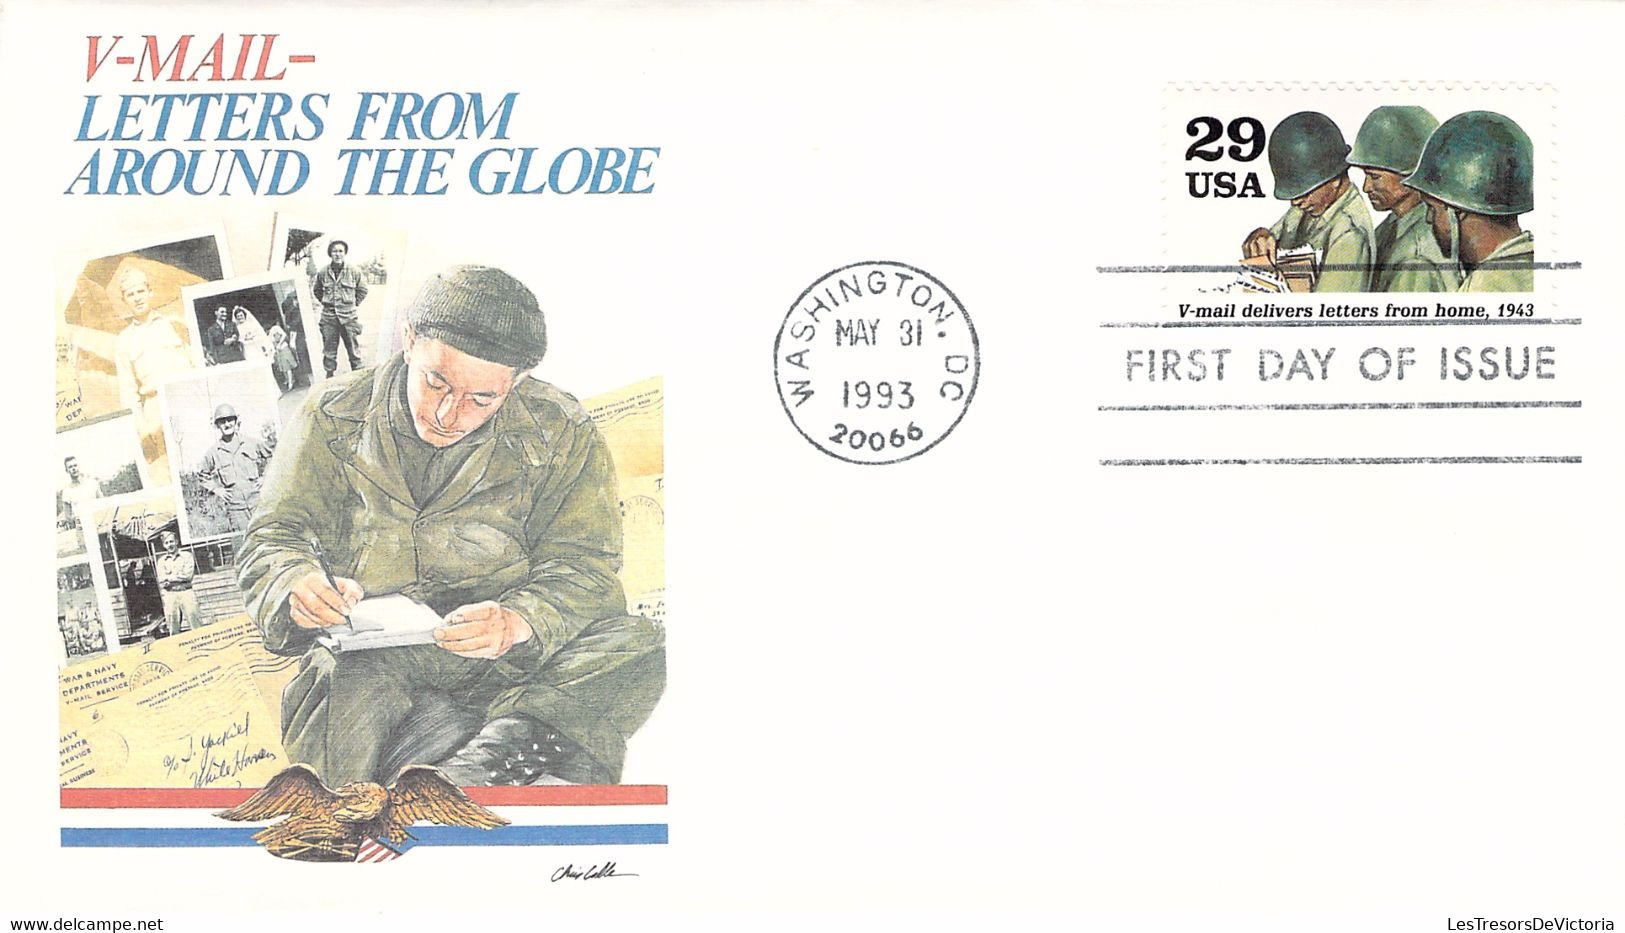 Lettre Premier Jour - First Day Fo Issue - V-mail Delivers Letters From Home 1943 - Washington 1993 - Militaria